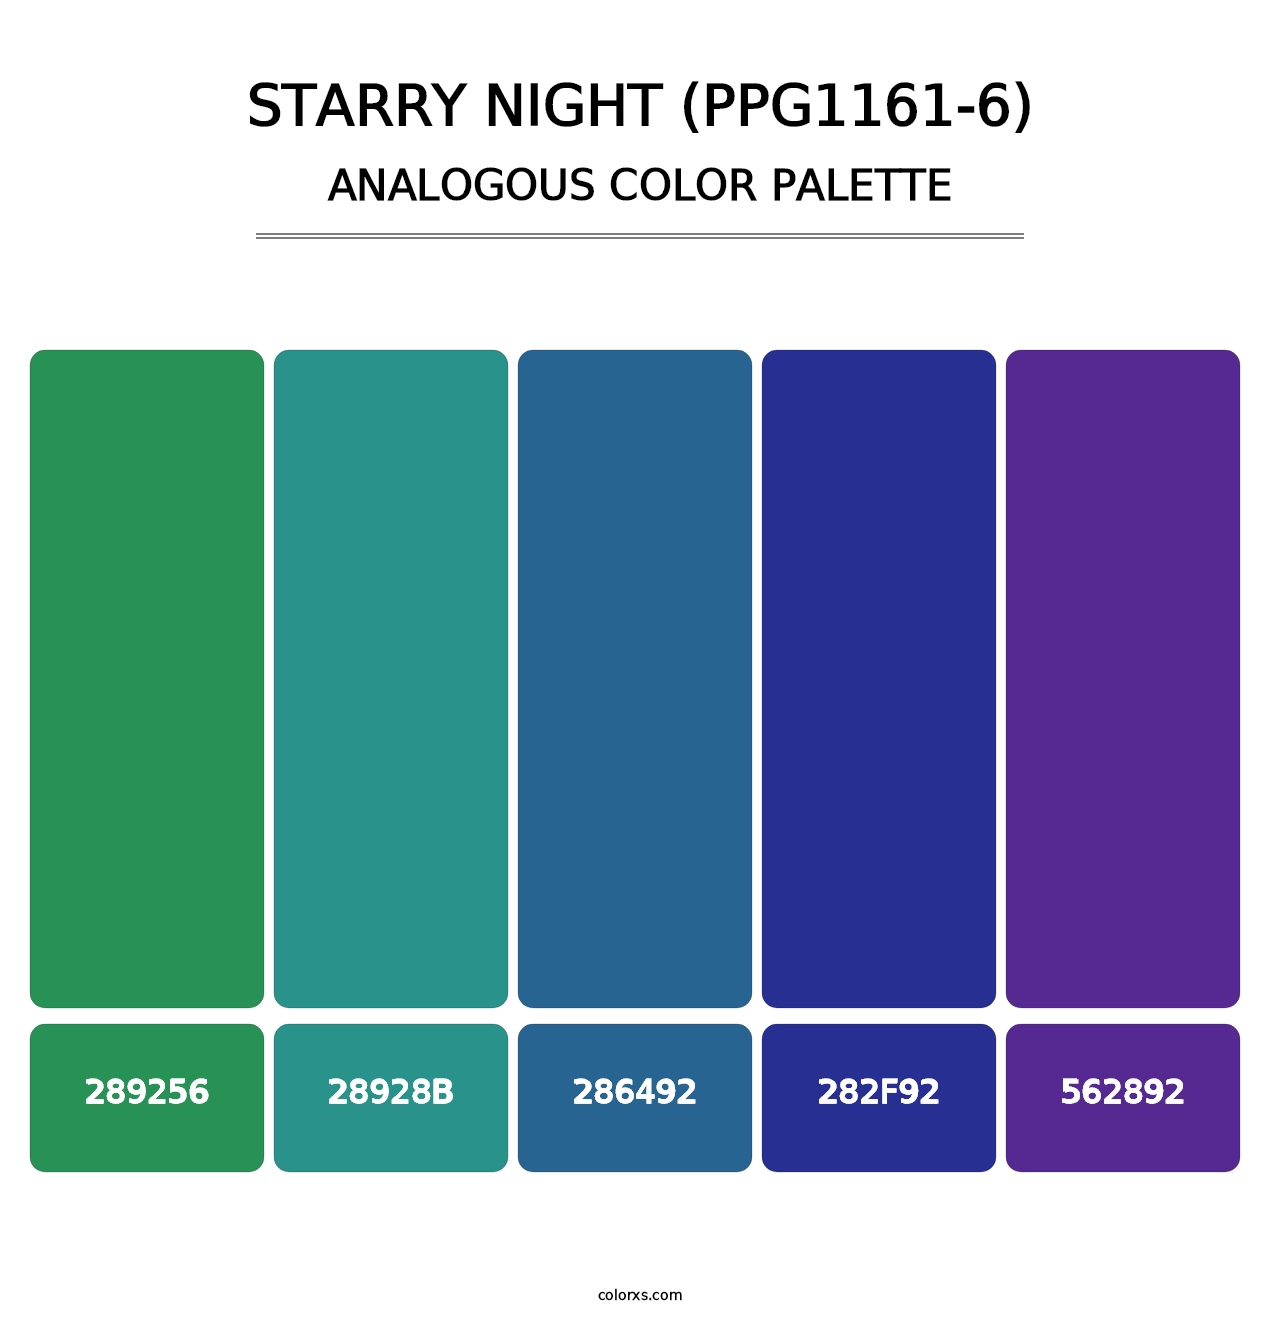 Starry Night (PPG1161-6) - Analogous Color Palette